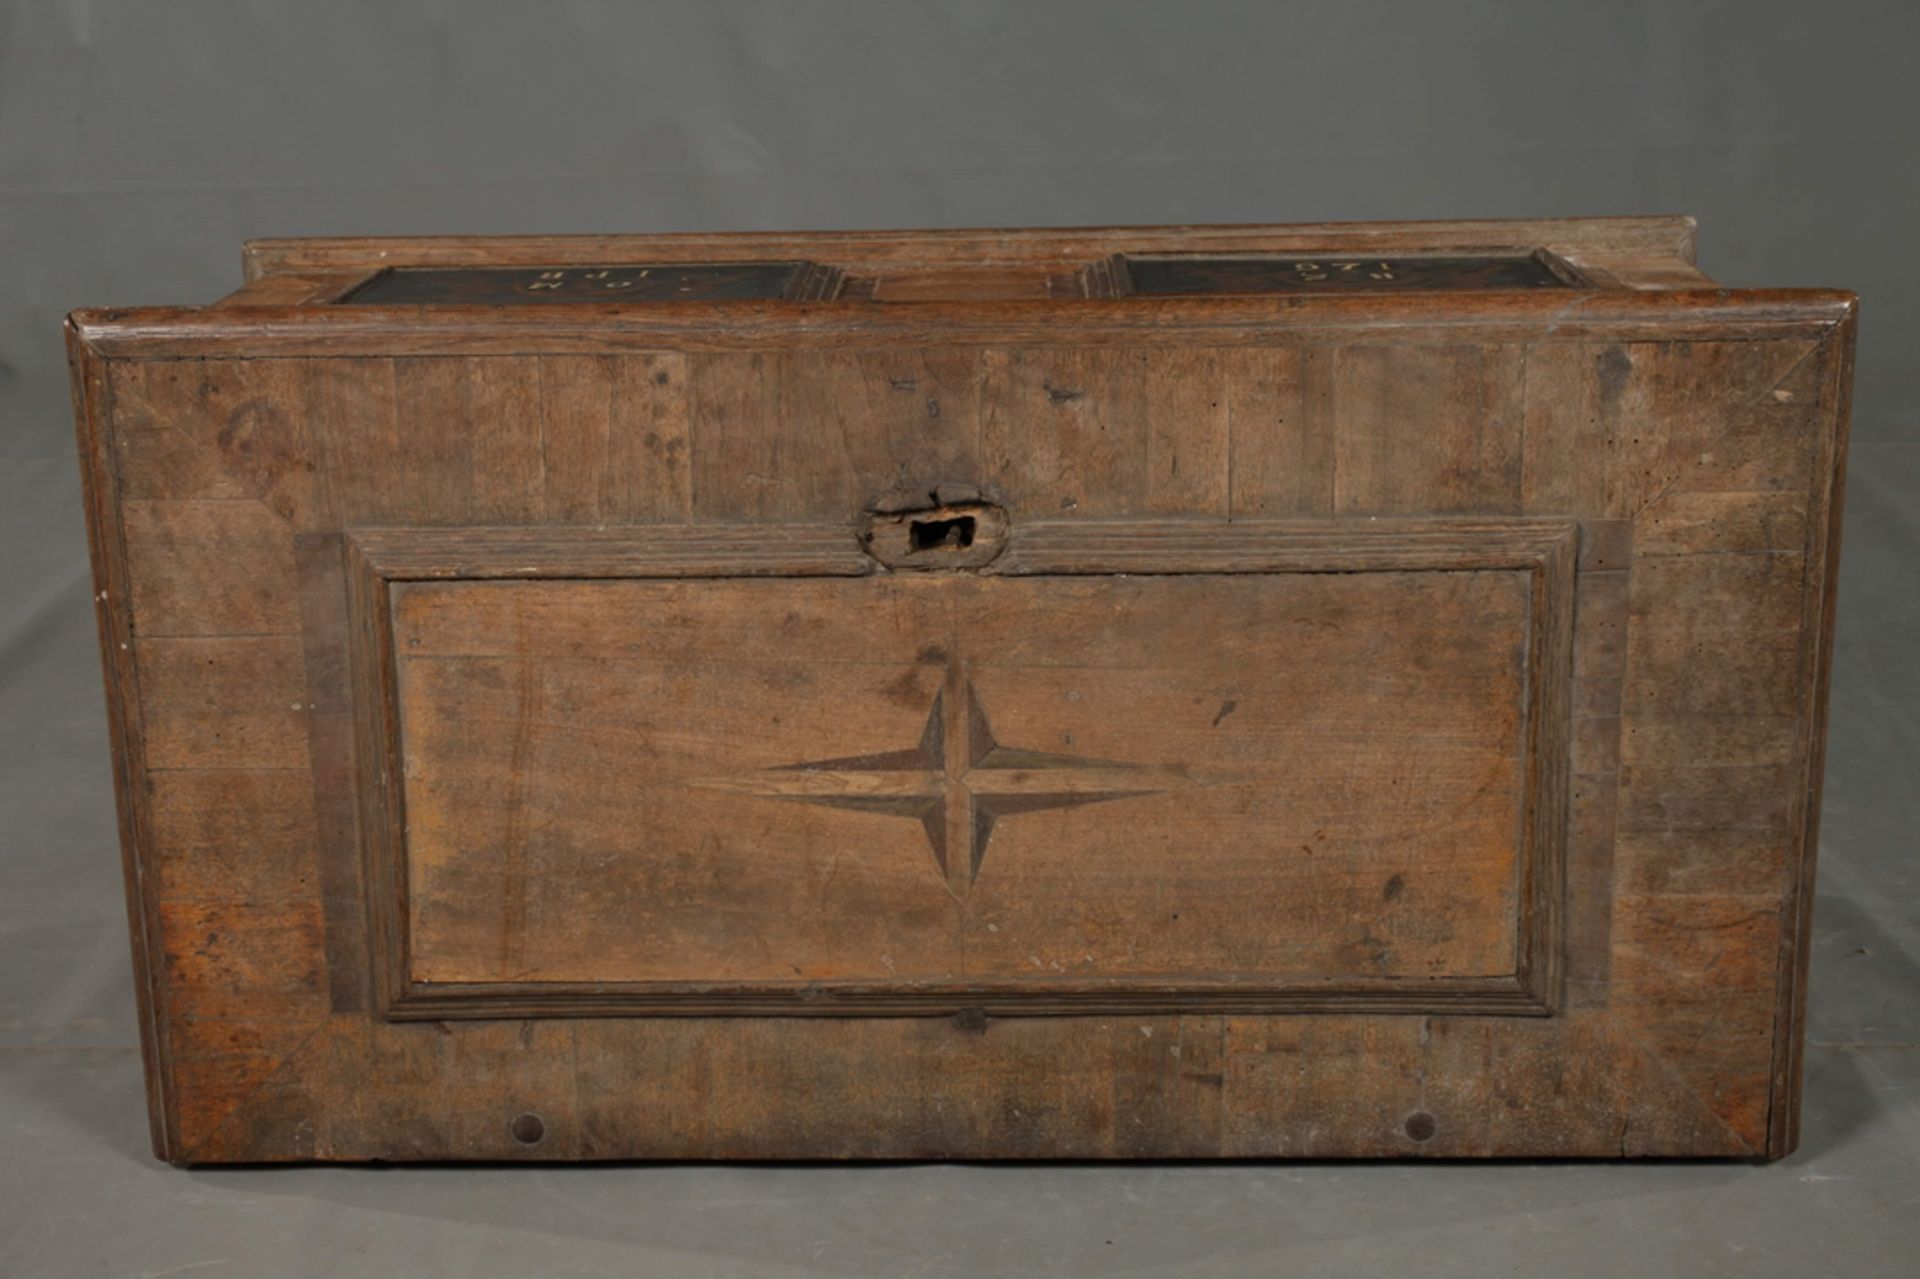 Inguild chest of the bakers' guild - Image 8 of 8